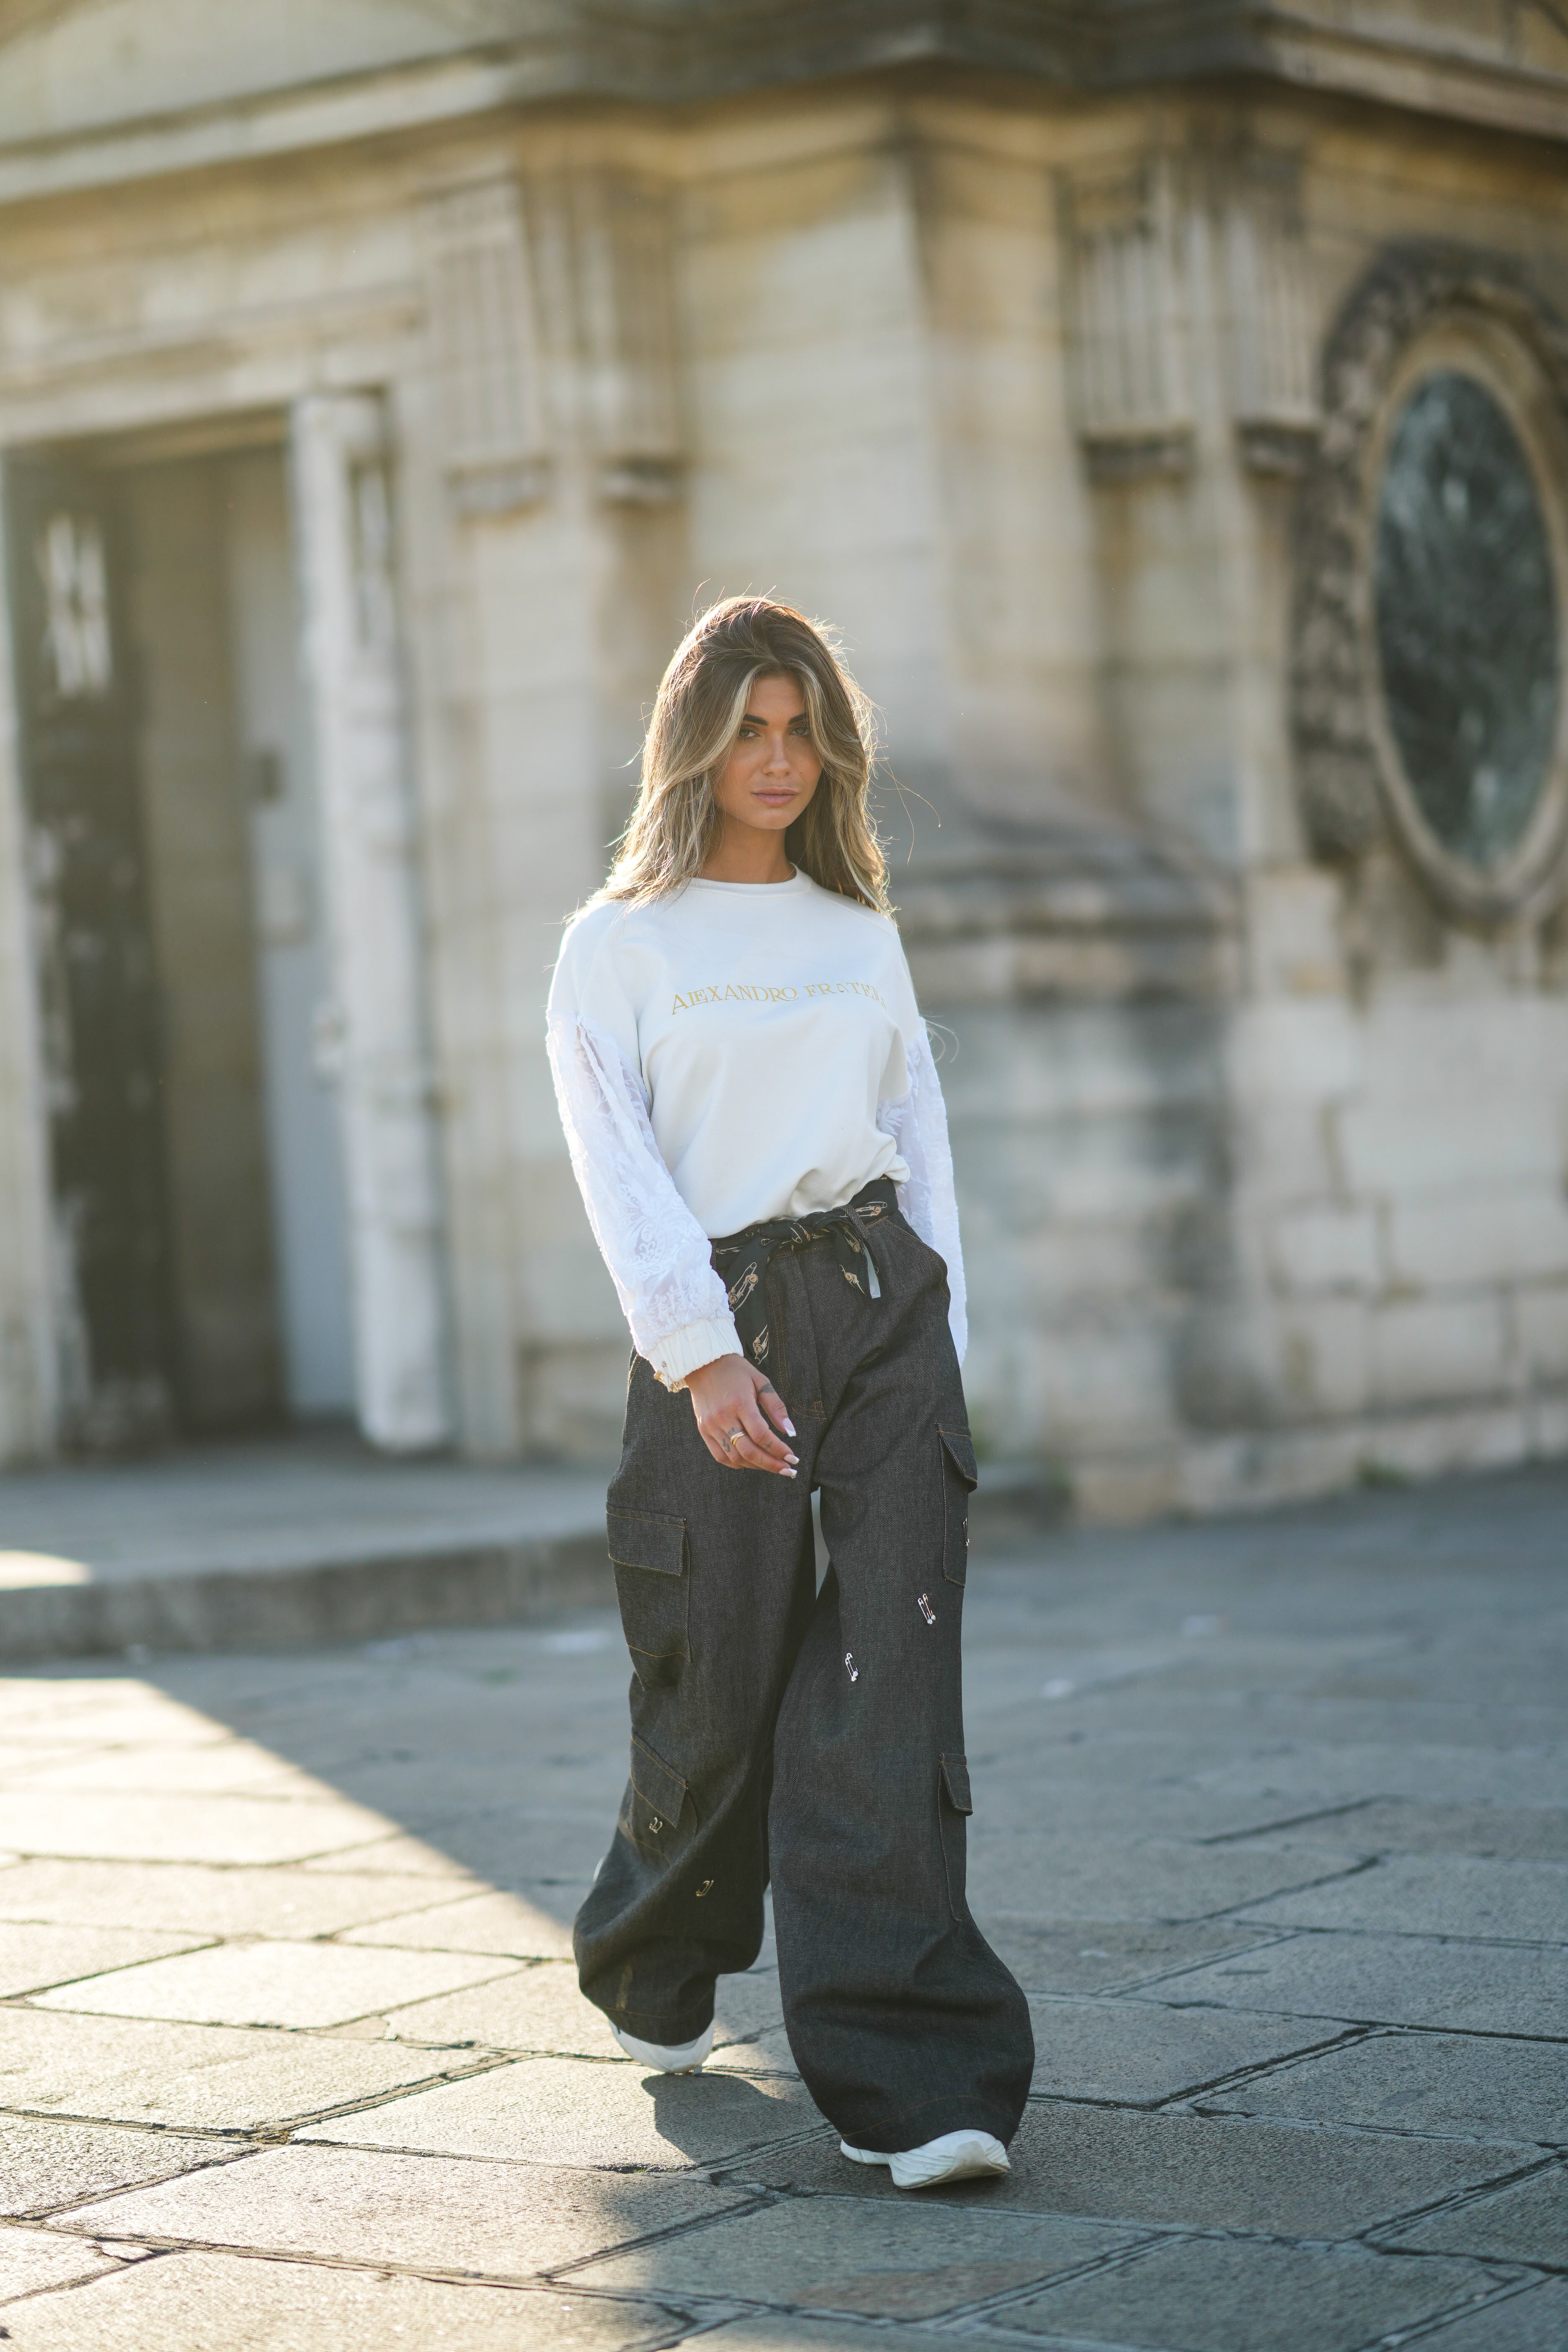 The Plus Harlow Wide-Leg Cargo Pant